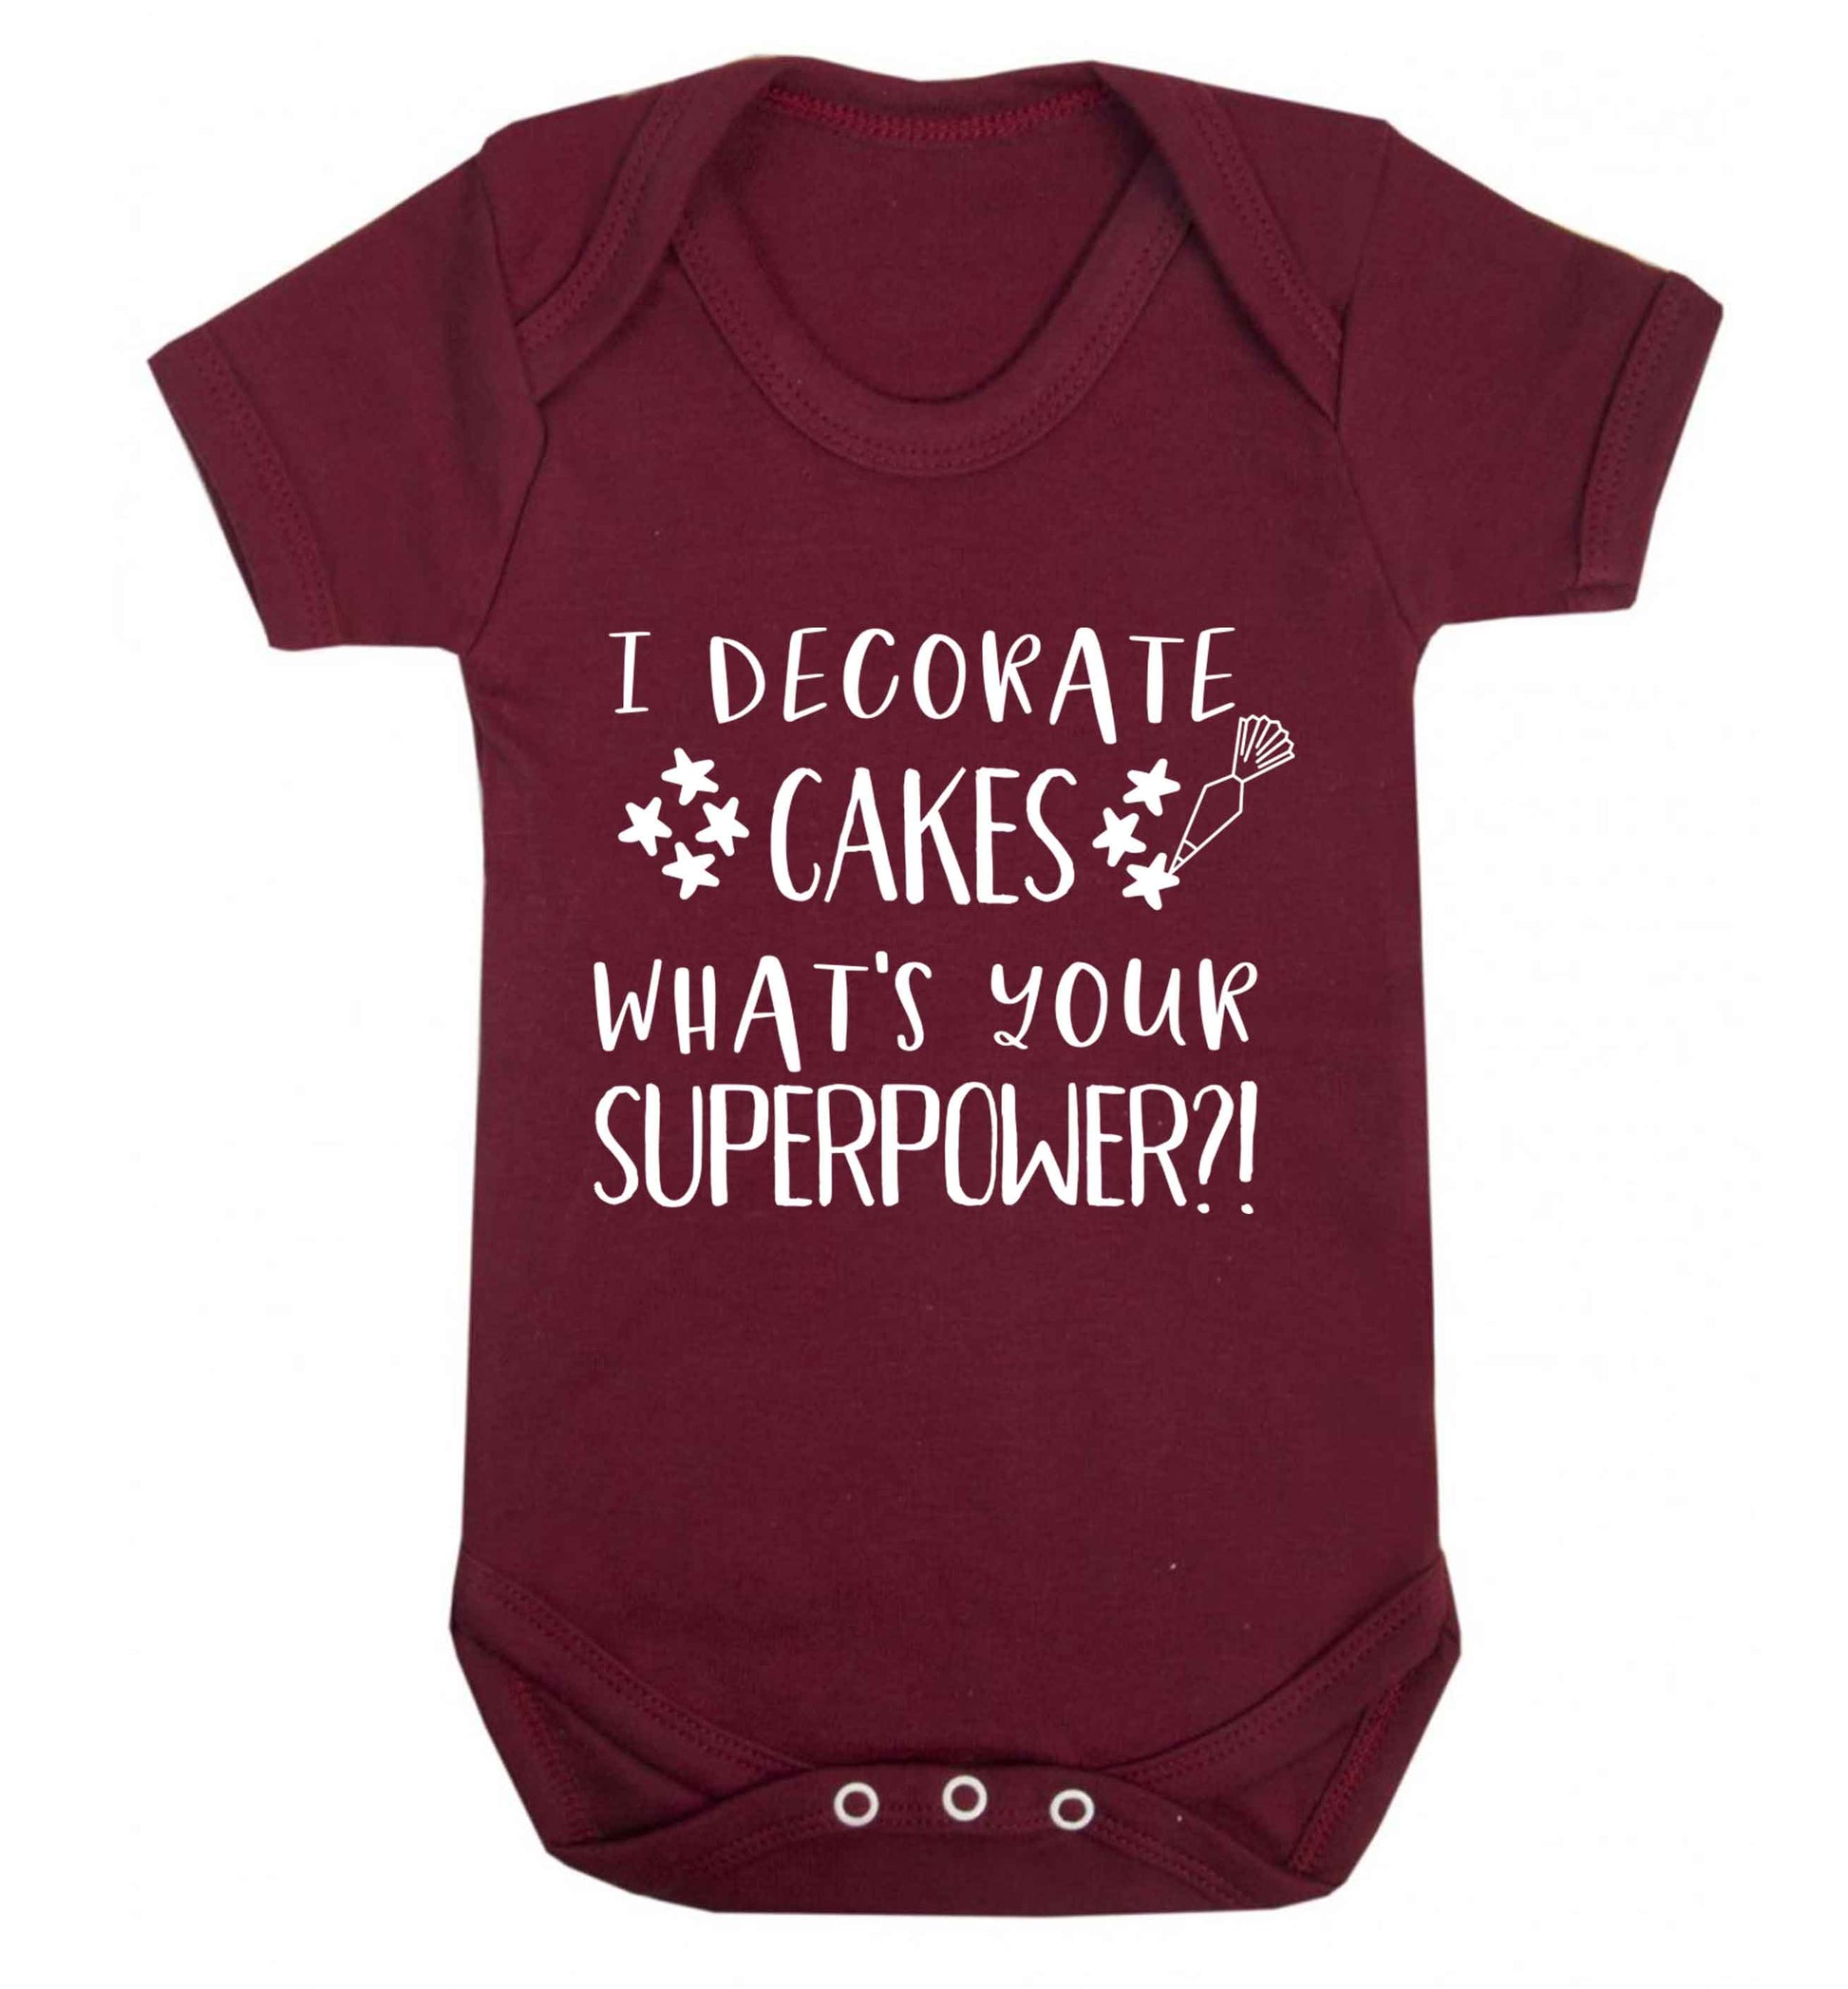 I decorate cakes what's your superpower?! Baby Vest maroon 18-24 months